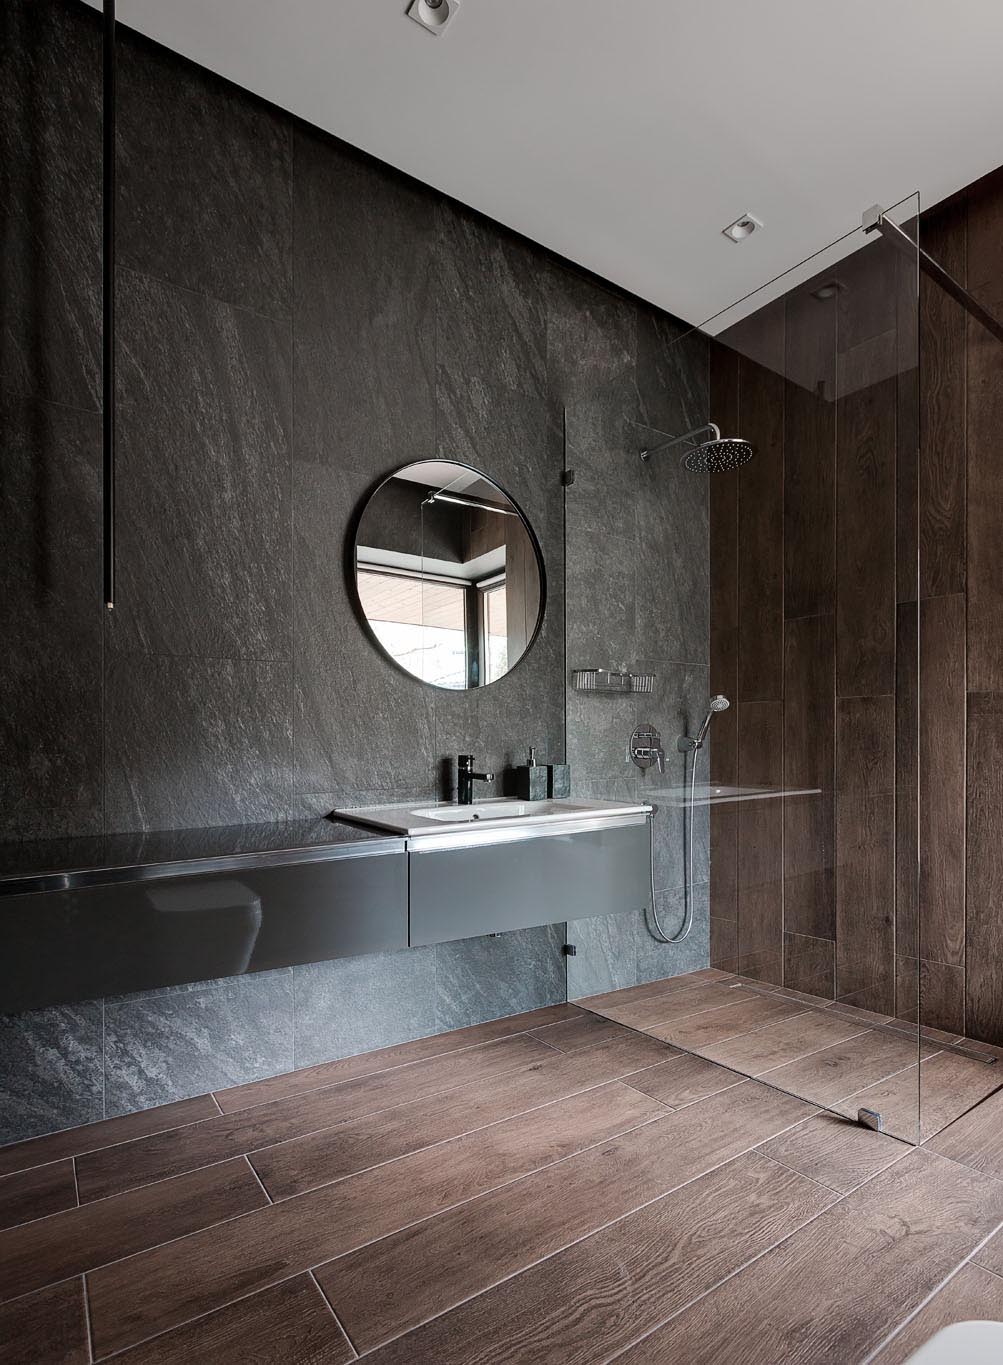 This modern bathroom has a dark material palette with gray walls, wood tiles that travel from the floor to the wall, and a floating black vanity.